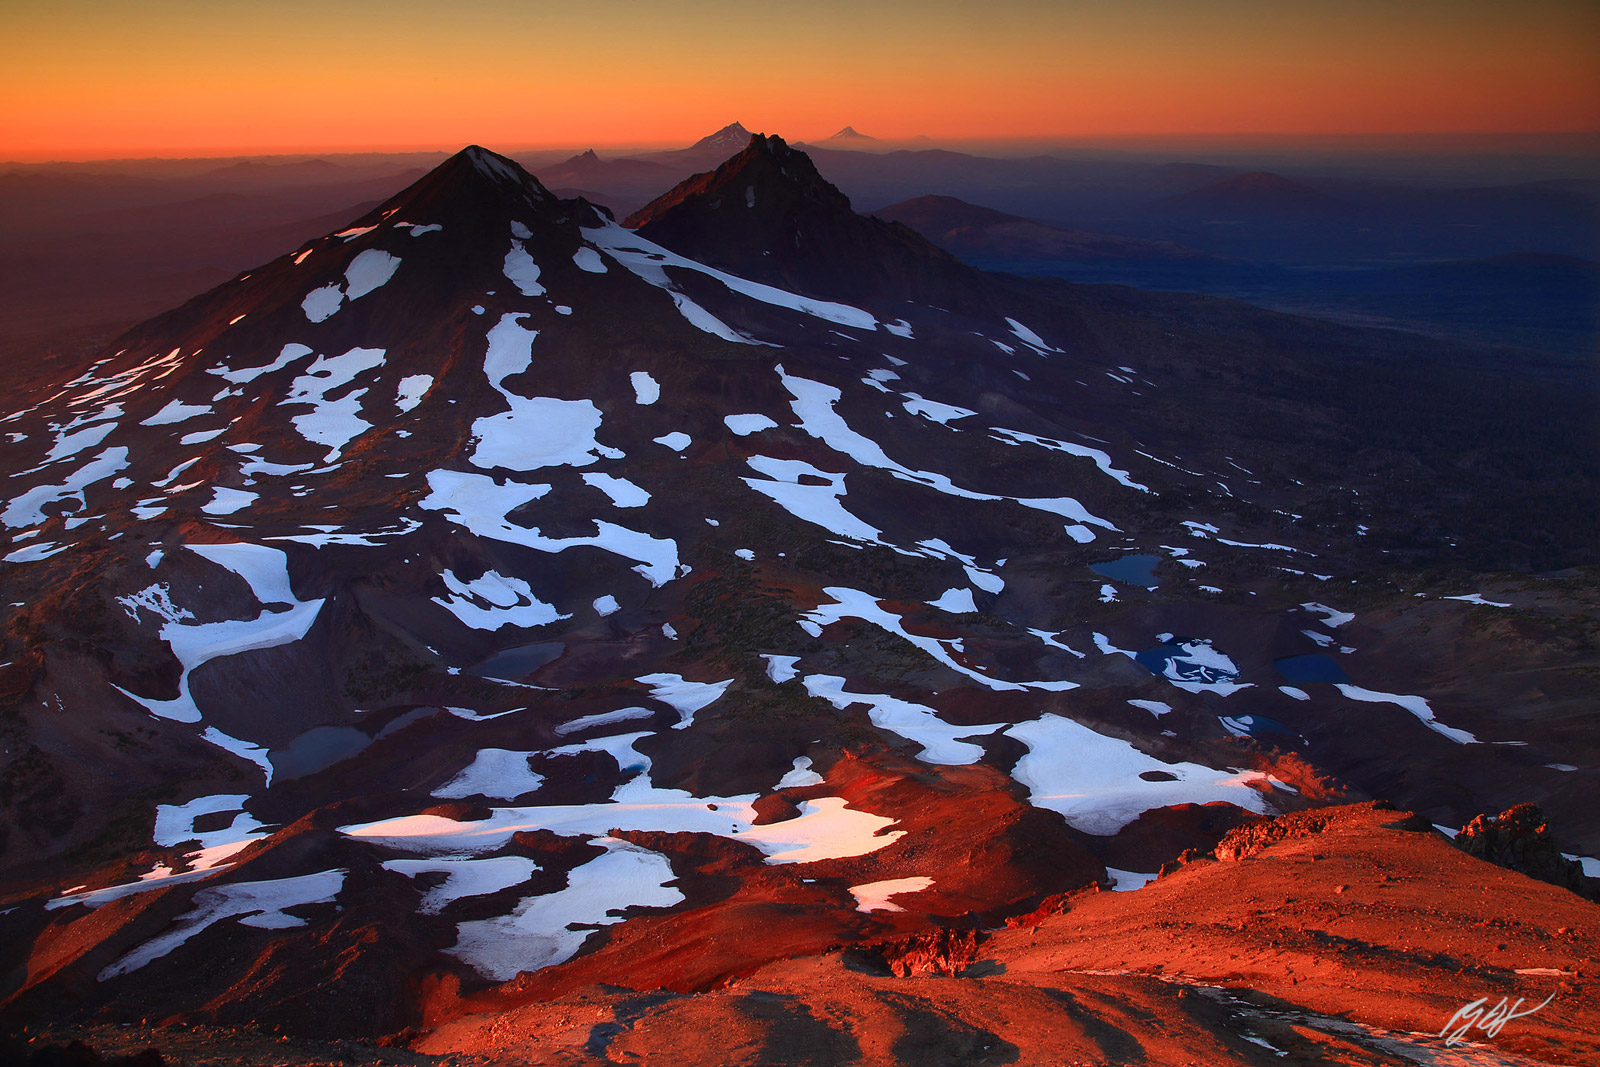 Sunset from the Summit of the South Sister, Three Sisters Wilderness in Oregon